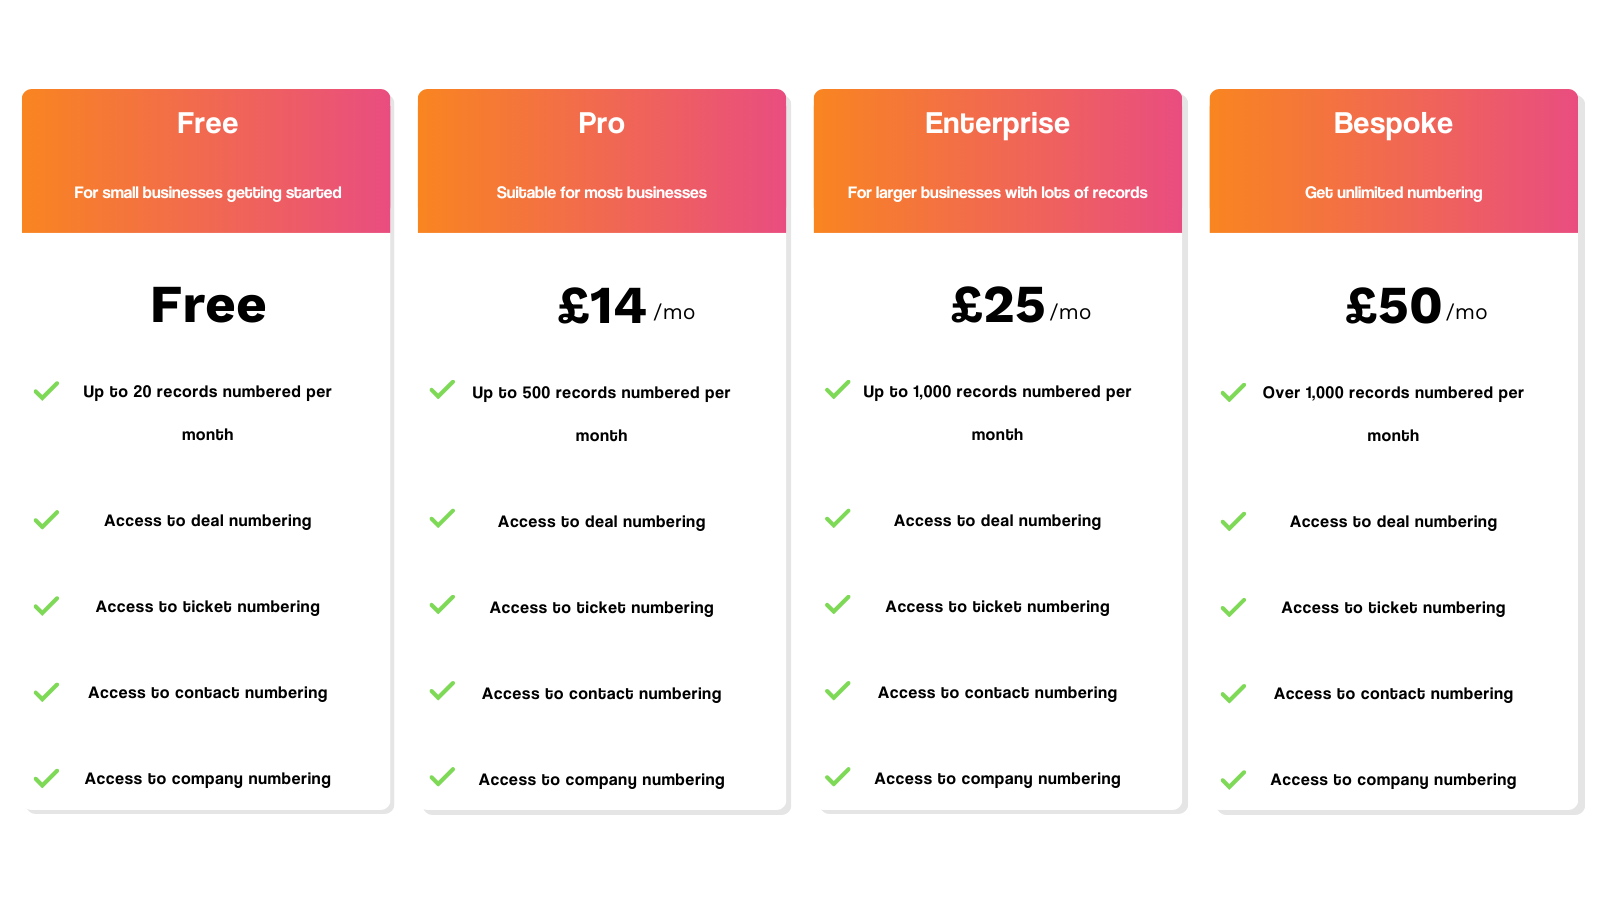 Pricing chart with 4 packages. Every package comes with, Access to, deal, contact, ticket and company numbering. Free has up to 20 records numbered per month, Pro which is £14 per month and has up to 500 records numbered per month, Enterprise which is £25 per month and has has up to 1000 records numbered per month, Bespoke which is £50 per month and has over 1000 records numbered per month